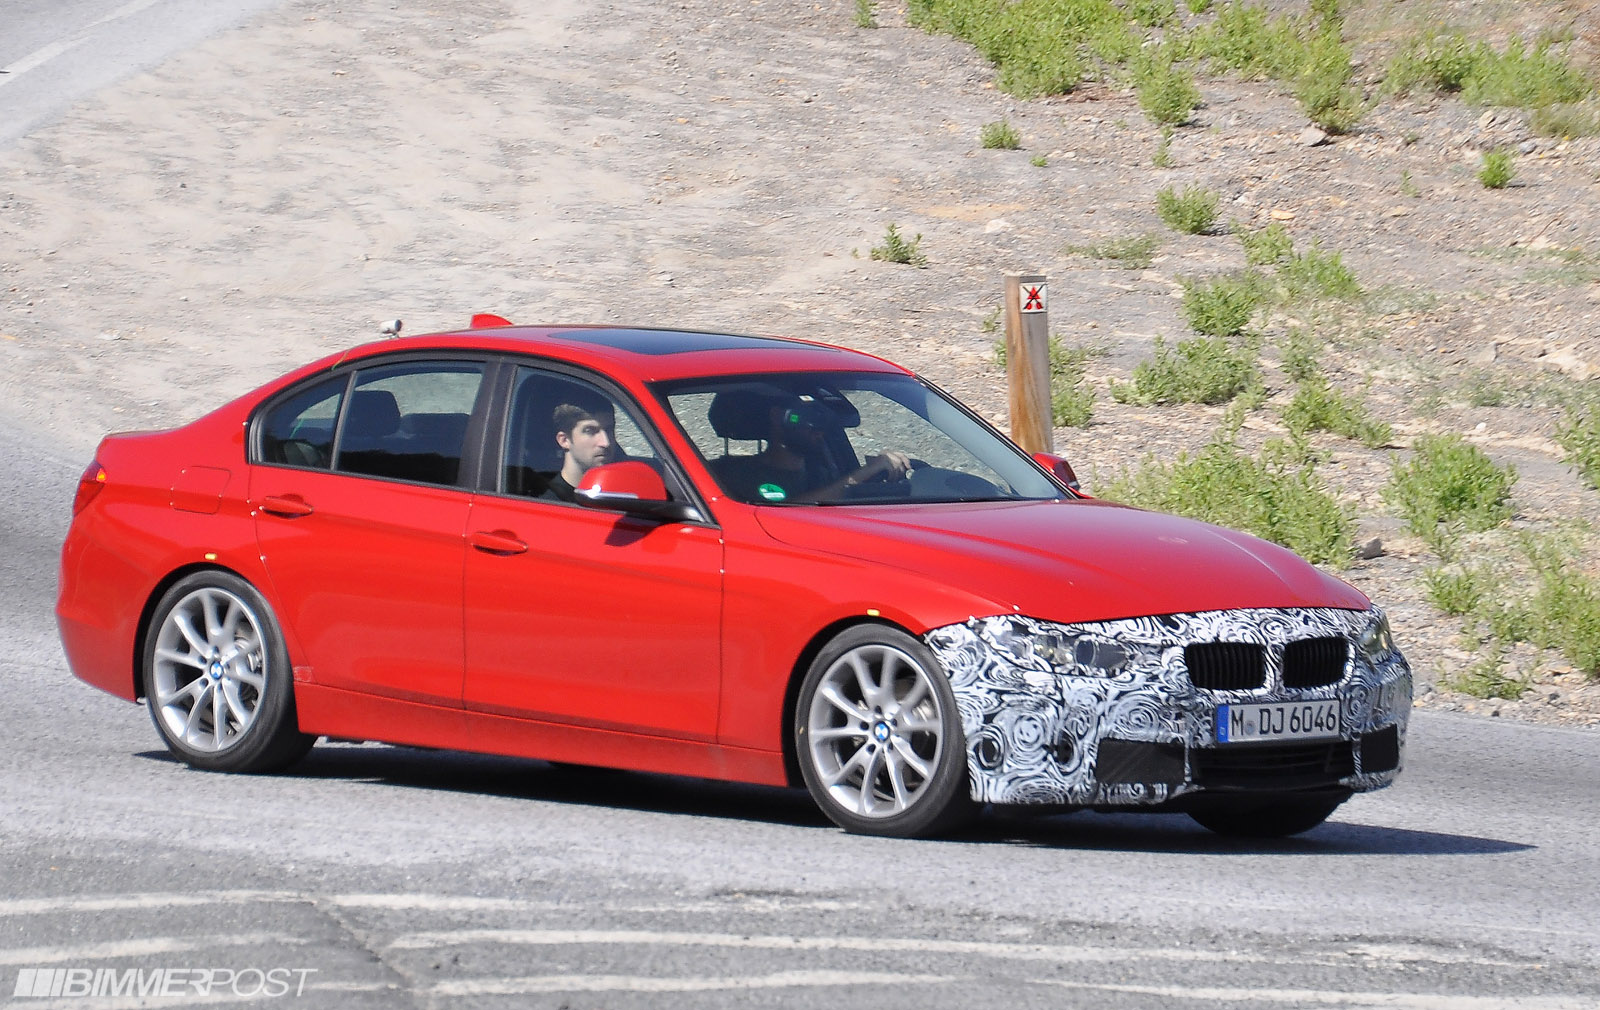 BMW F30 3 Series LCI Facelift Prototype Spotted